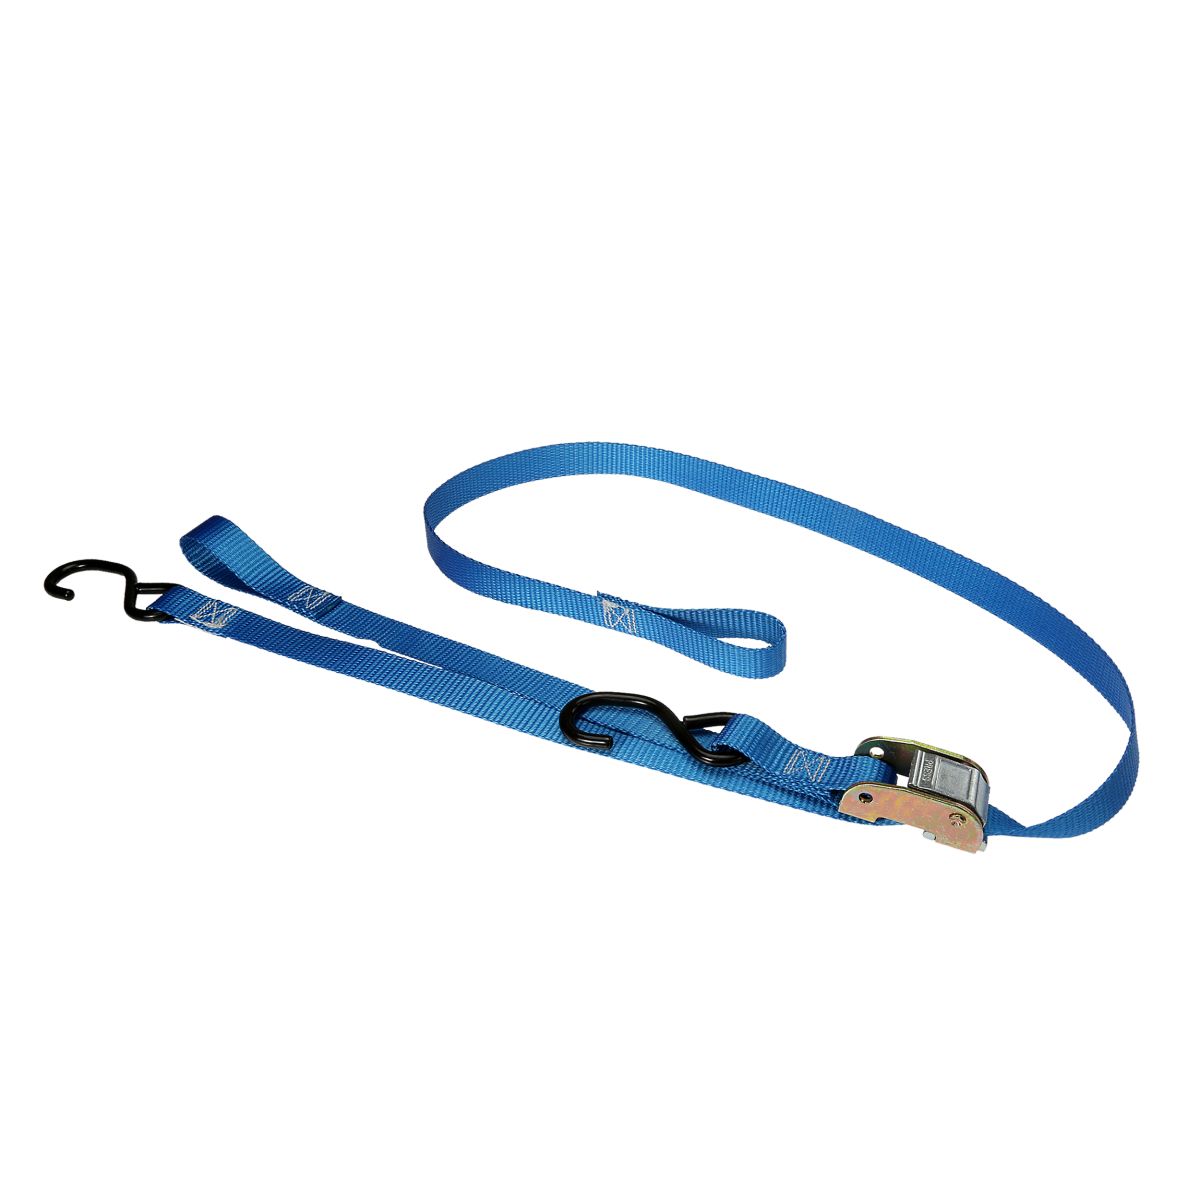 1" x 6' Blue Premium Cam Buckle Strap with S-Hooks & Pull Loop